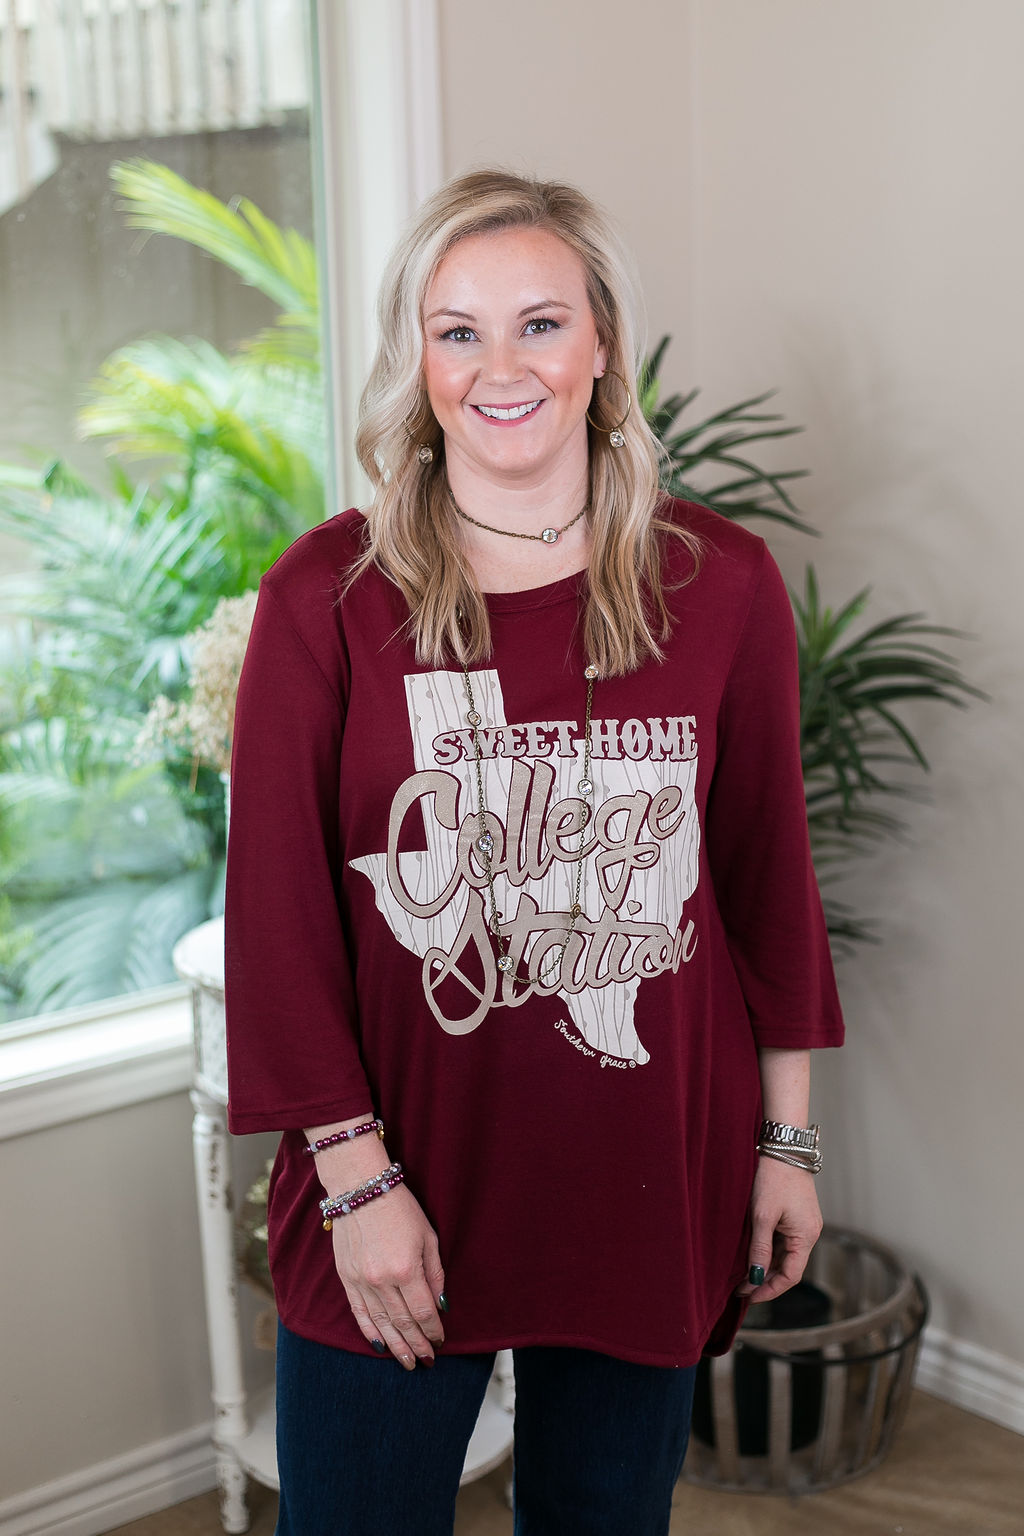 Sweet Home College Station Loose Fit 3/4 Sleeve Top in Maroon game day tee dolman top burgundy texas a&m aggies 